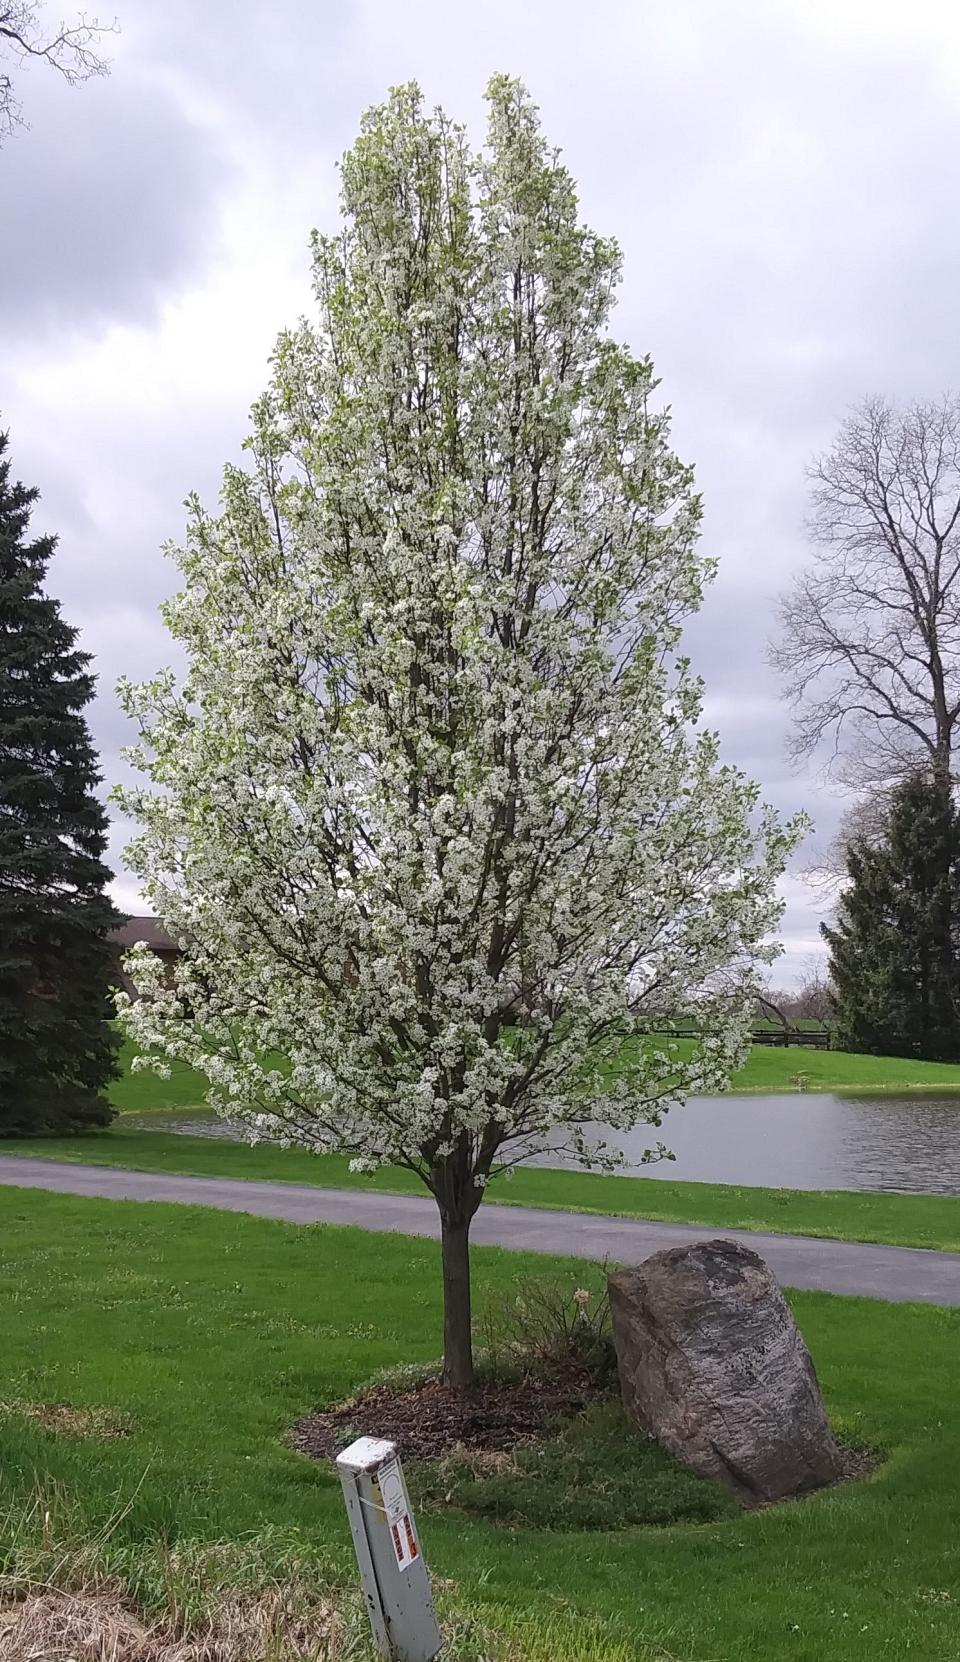 A Callery pear tree, once considered a good landscaping tree, can no longer be sold in Ohio.